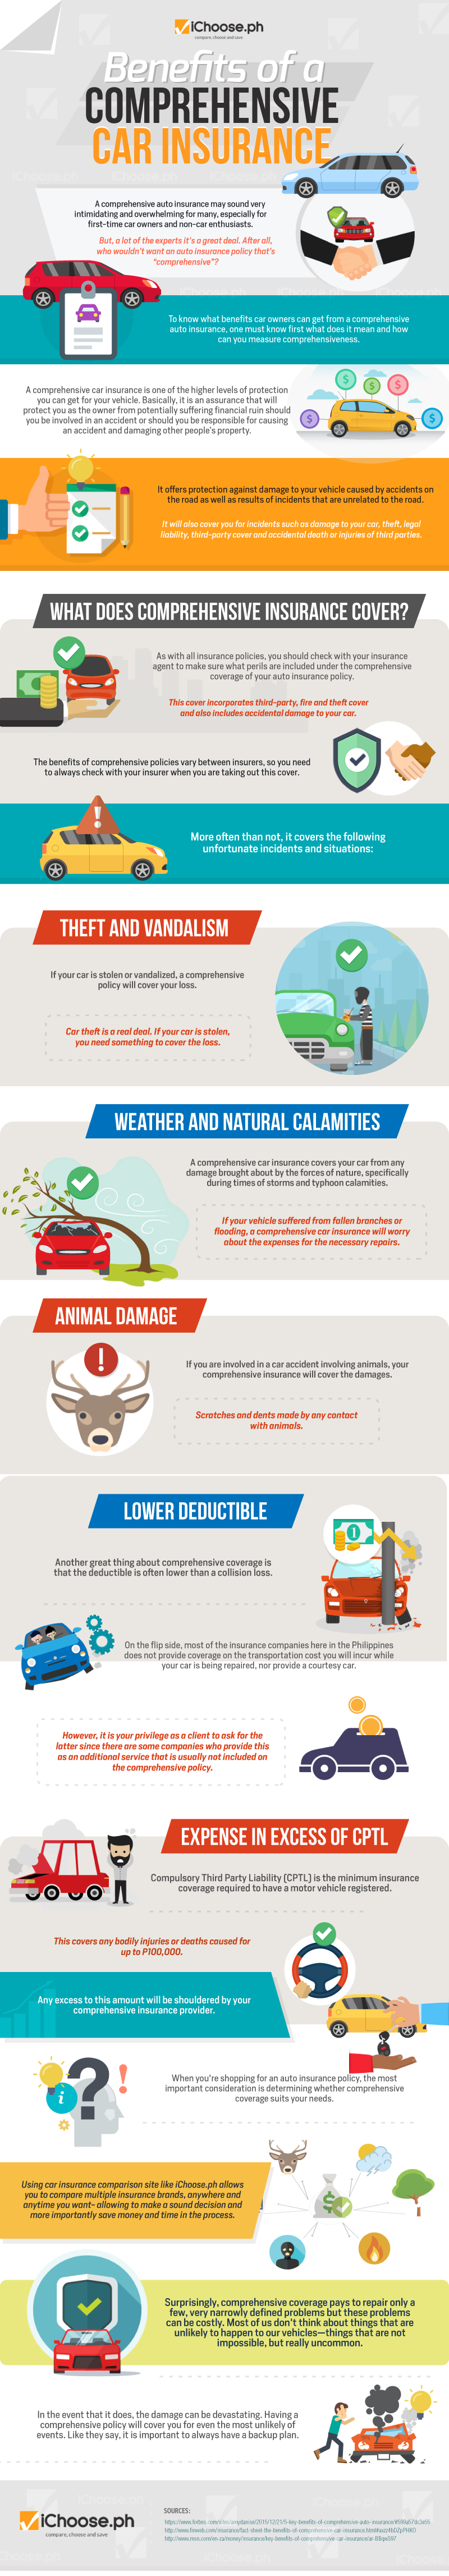 Benefits of a Comprehensive Car Insurance [Infographic]